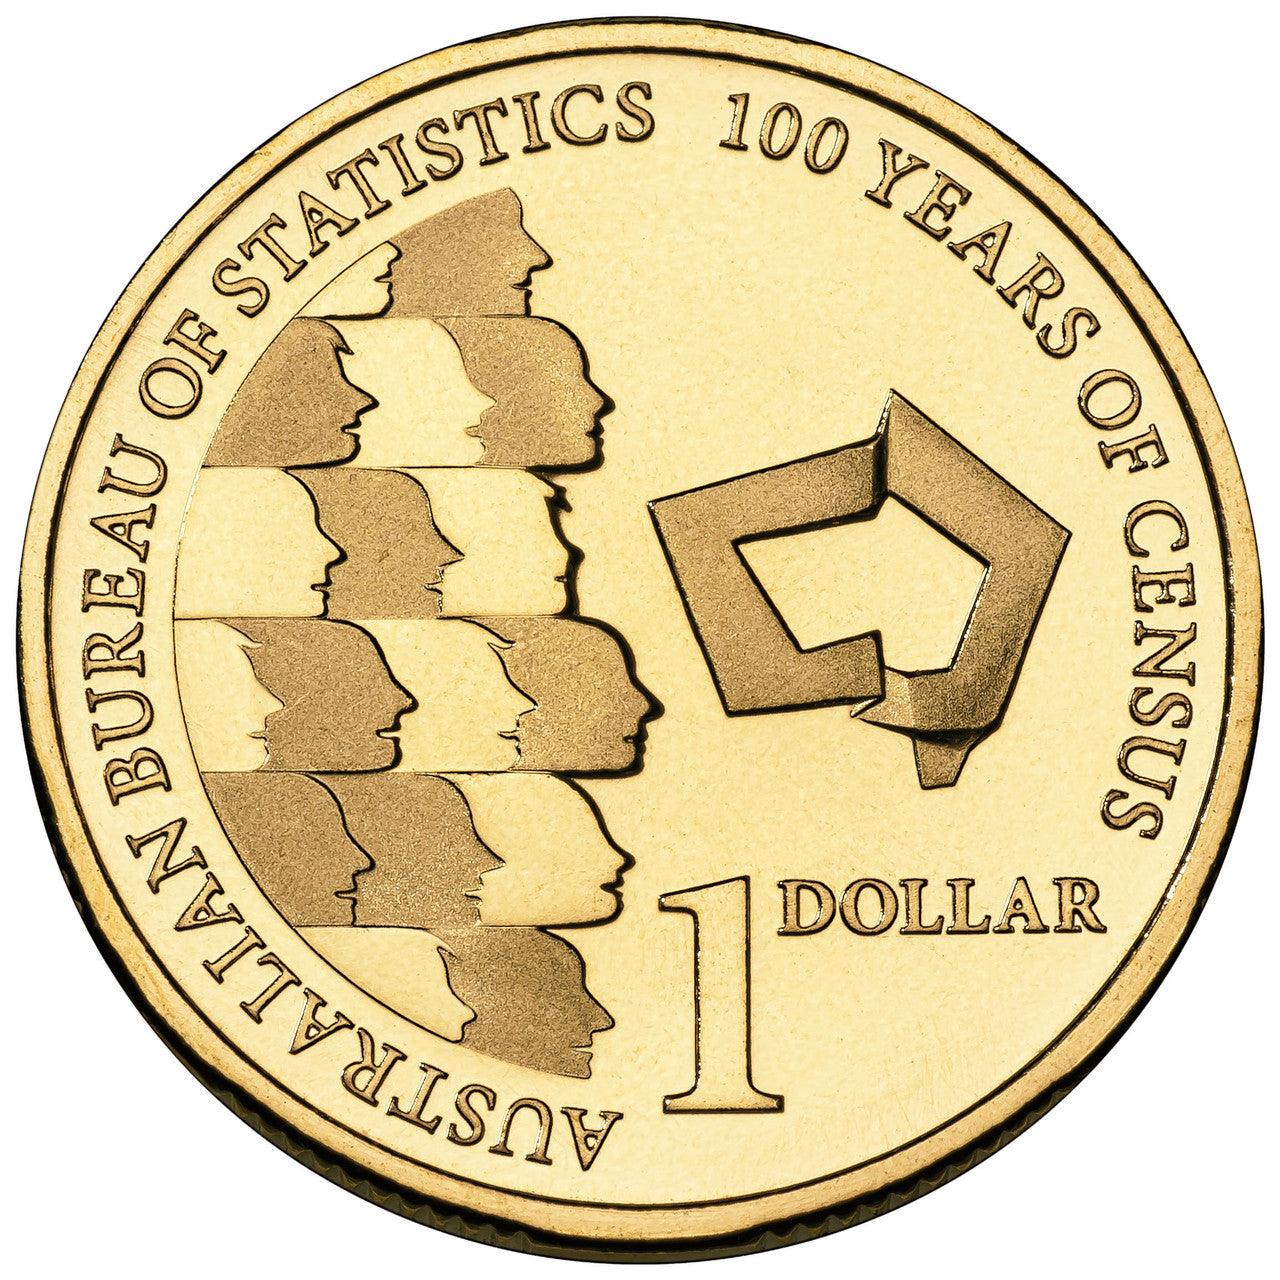 2011 Australian $1 Coin - 100 Years of Census - Loose Change Coins